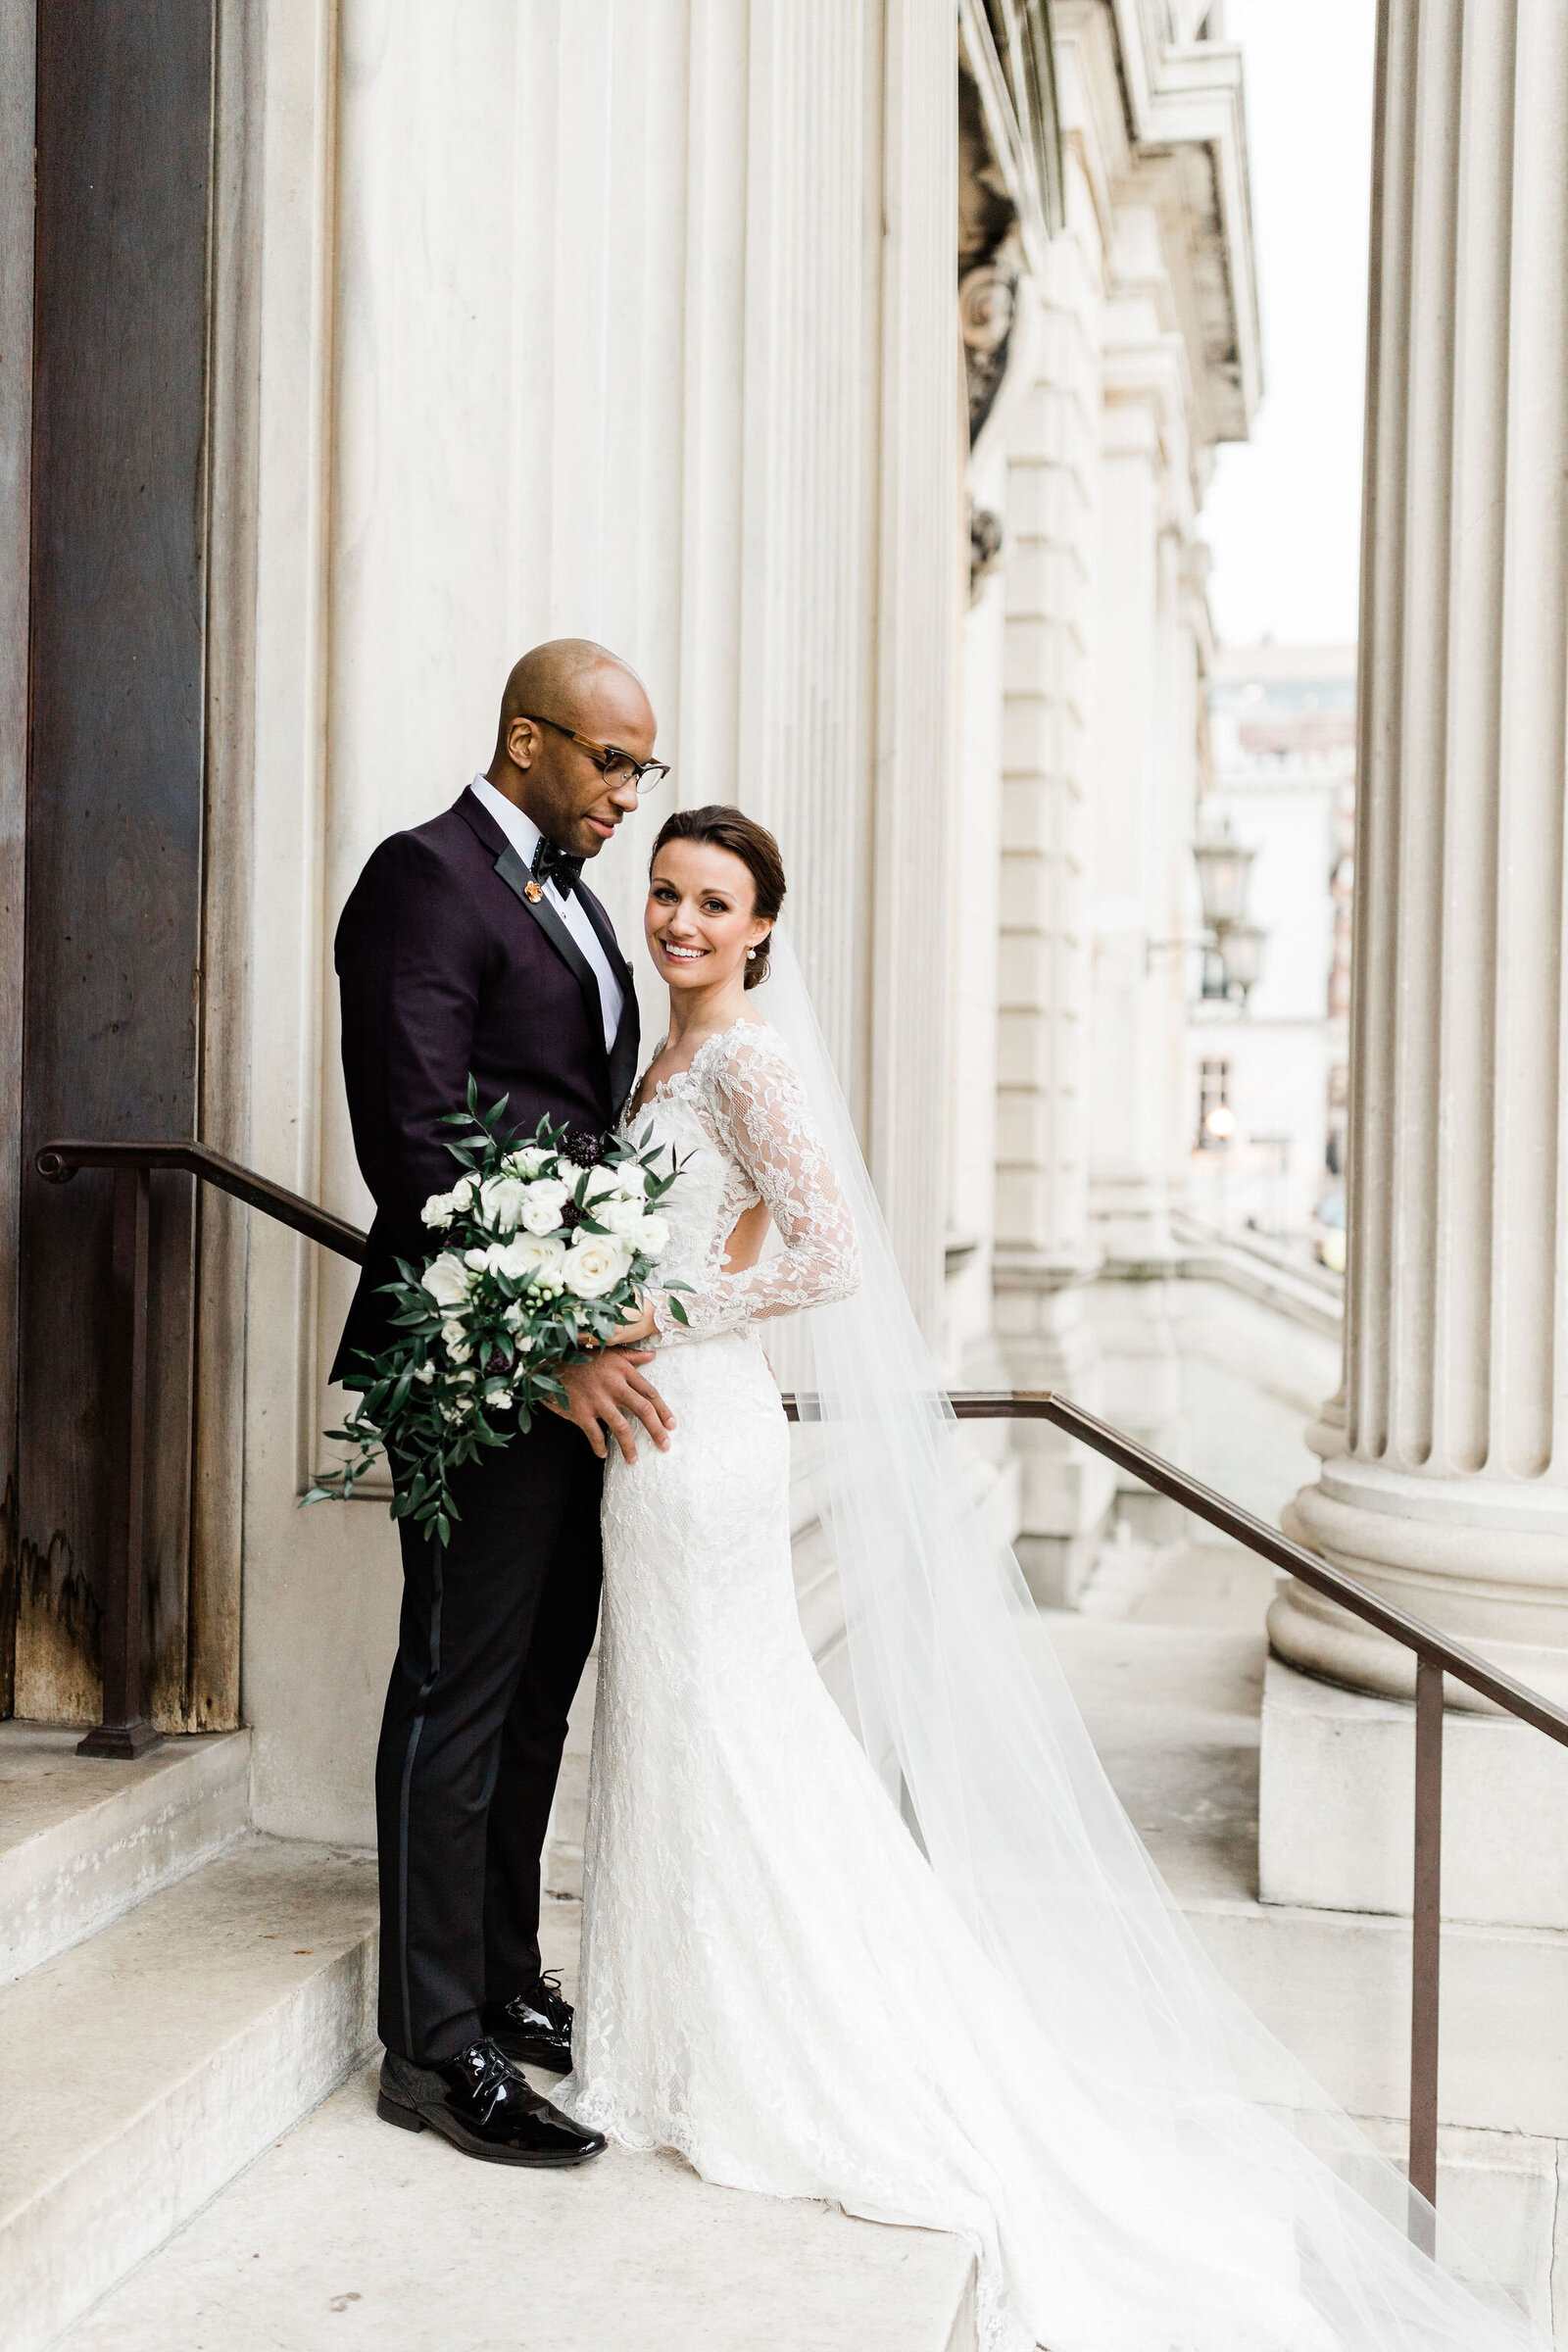 Classic Wedding Photos | The Peabody Library Baltimore MD | The Axtells Photo and Film